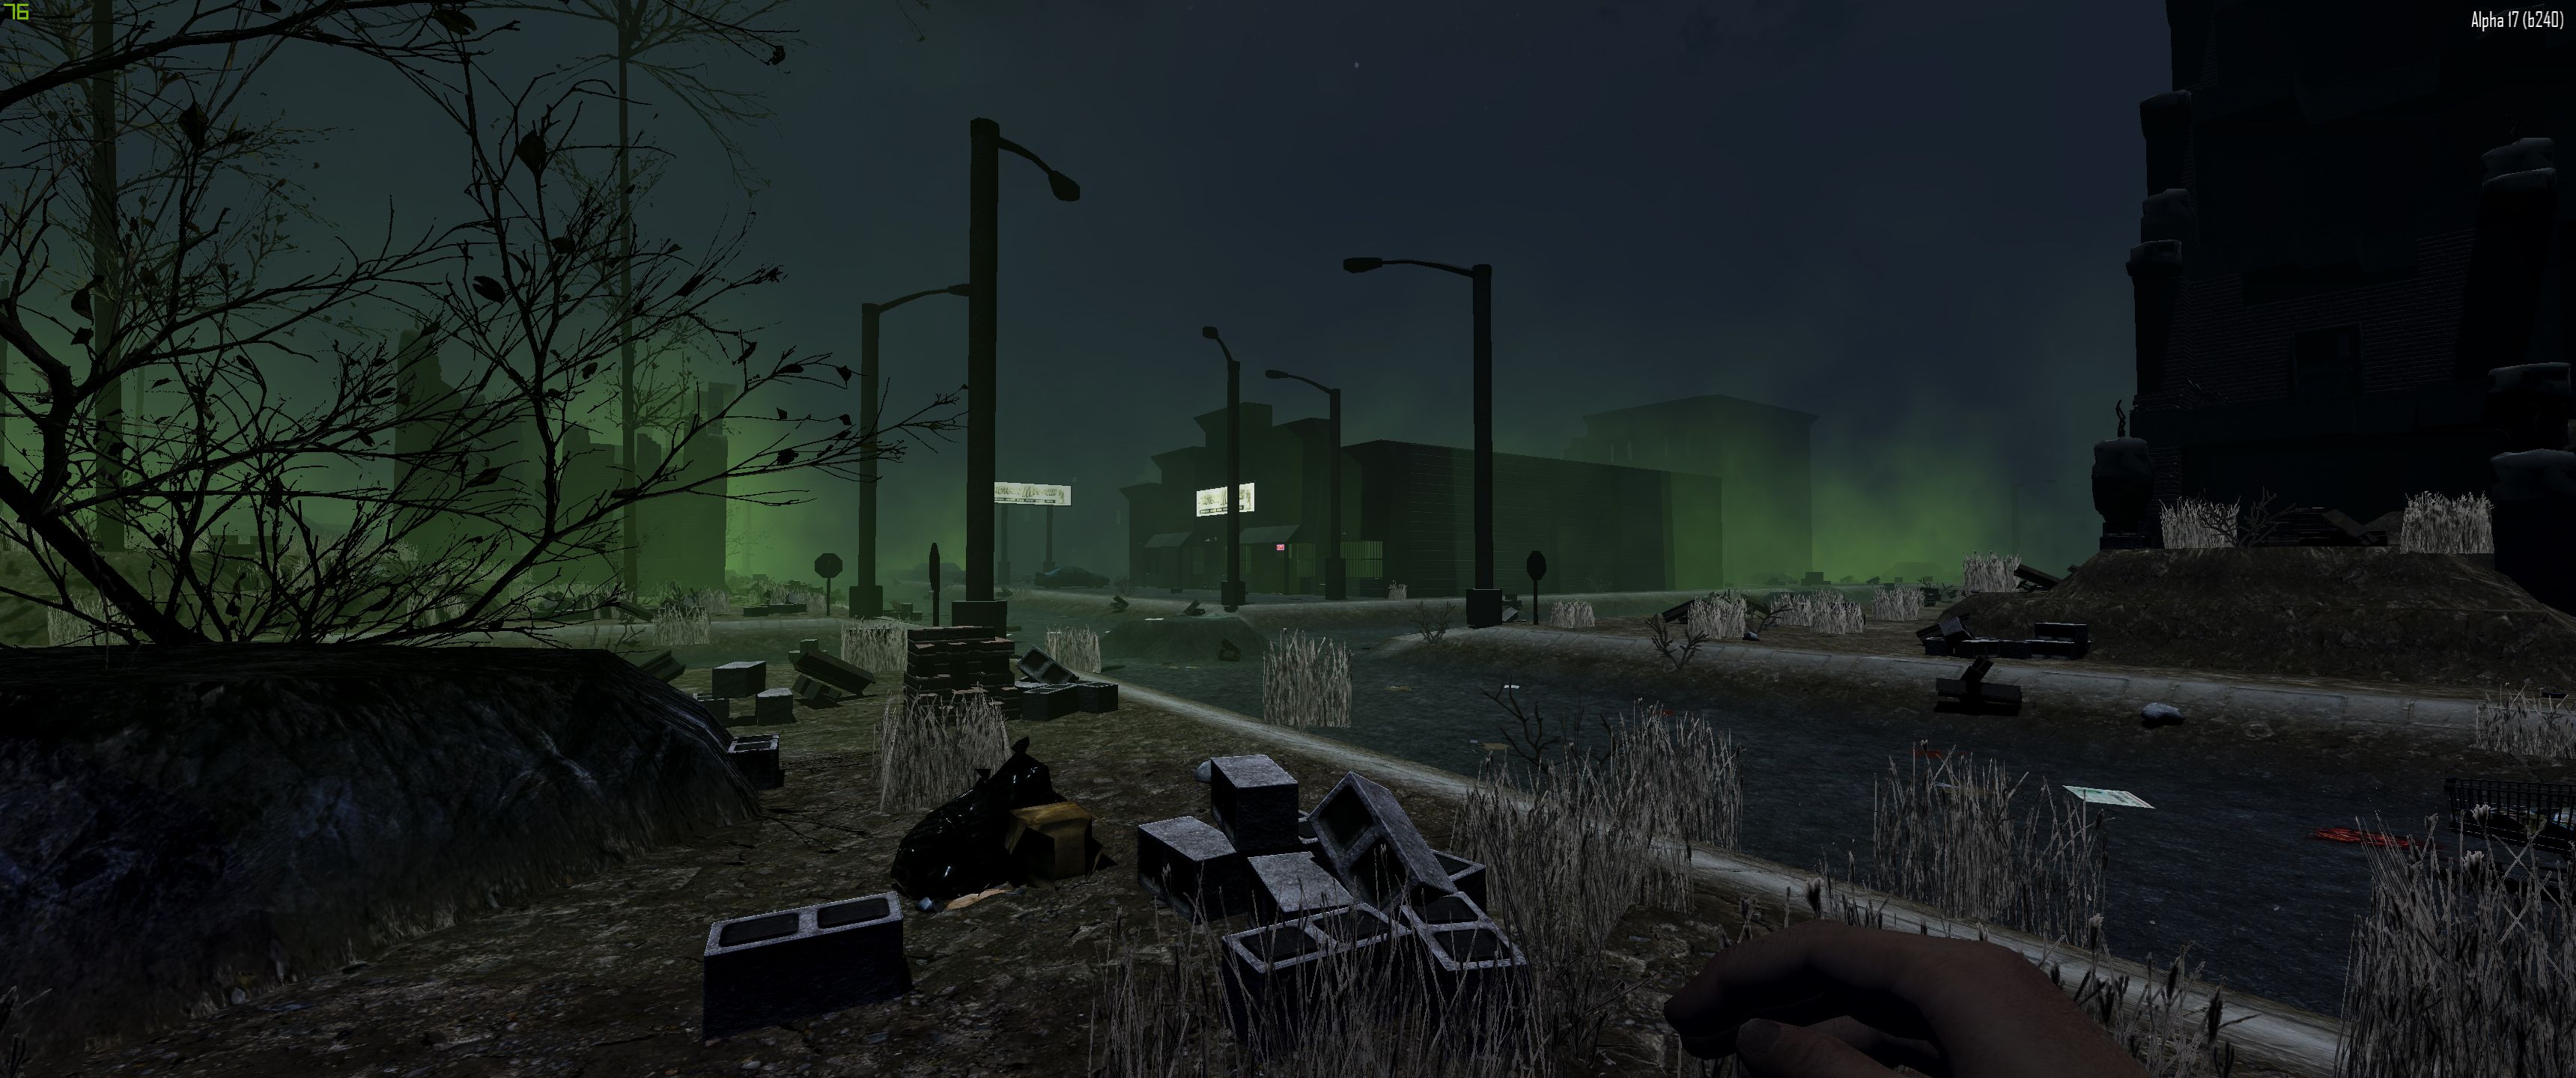 7 days to die modded options